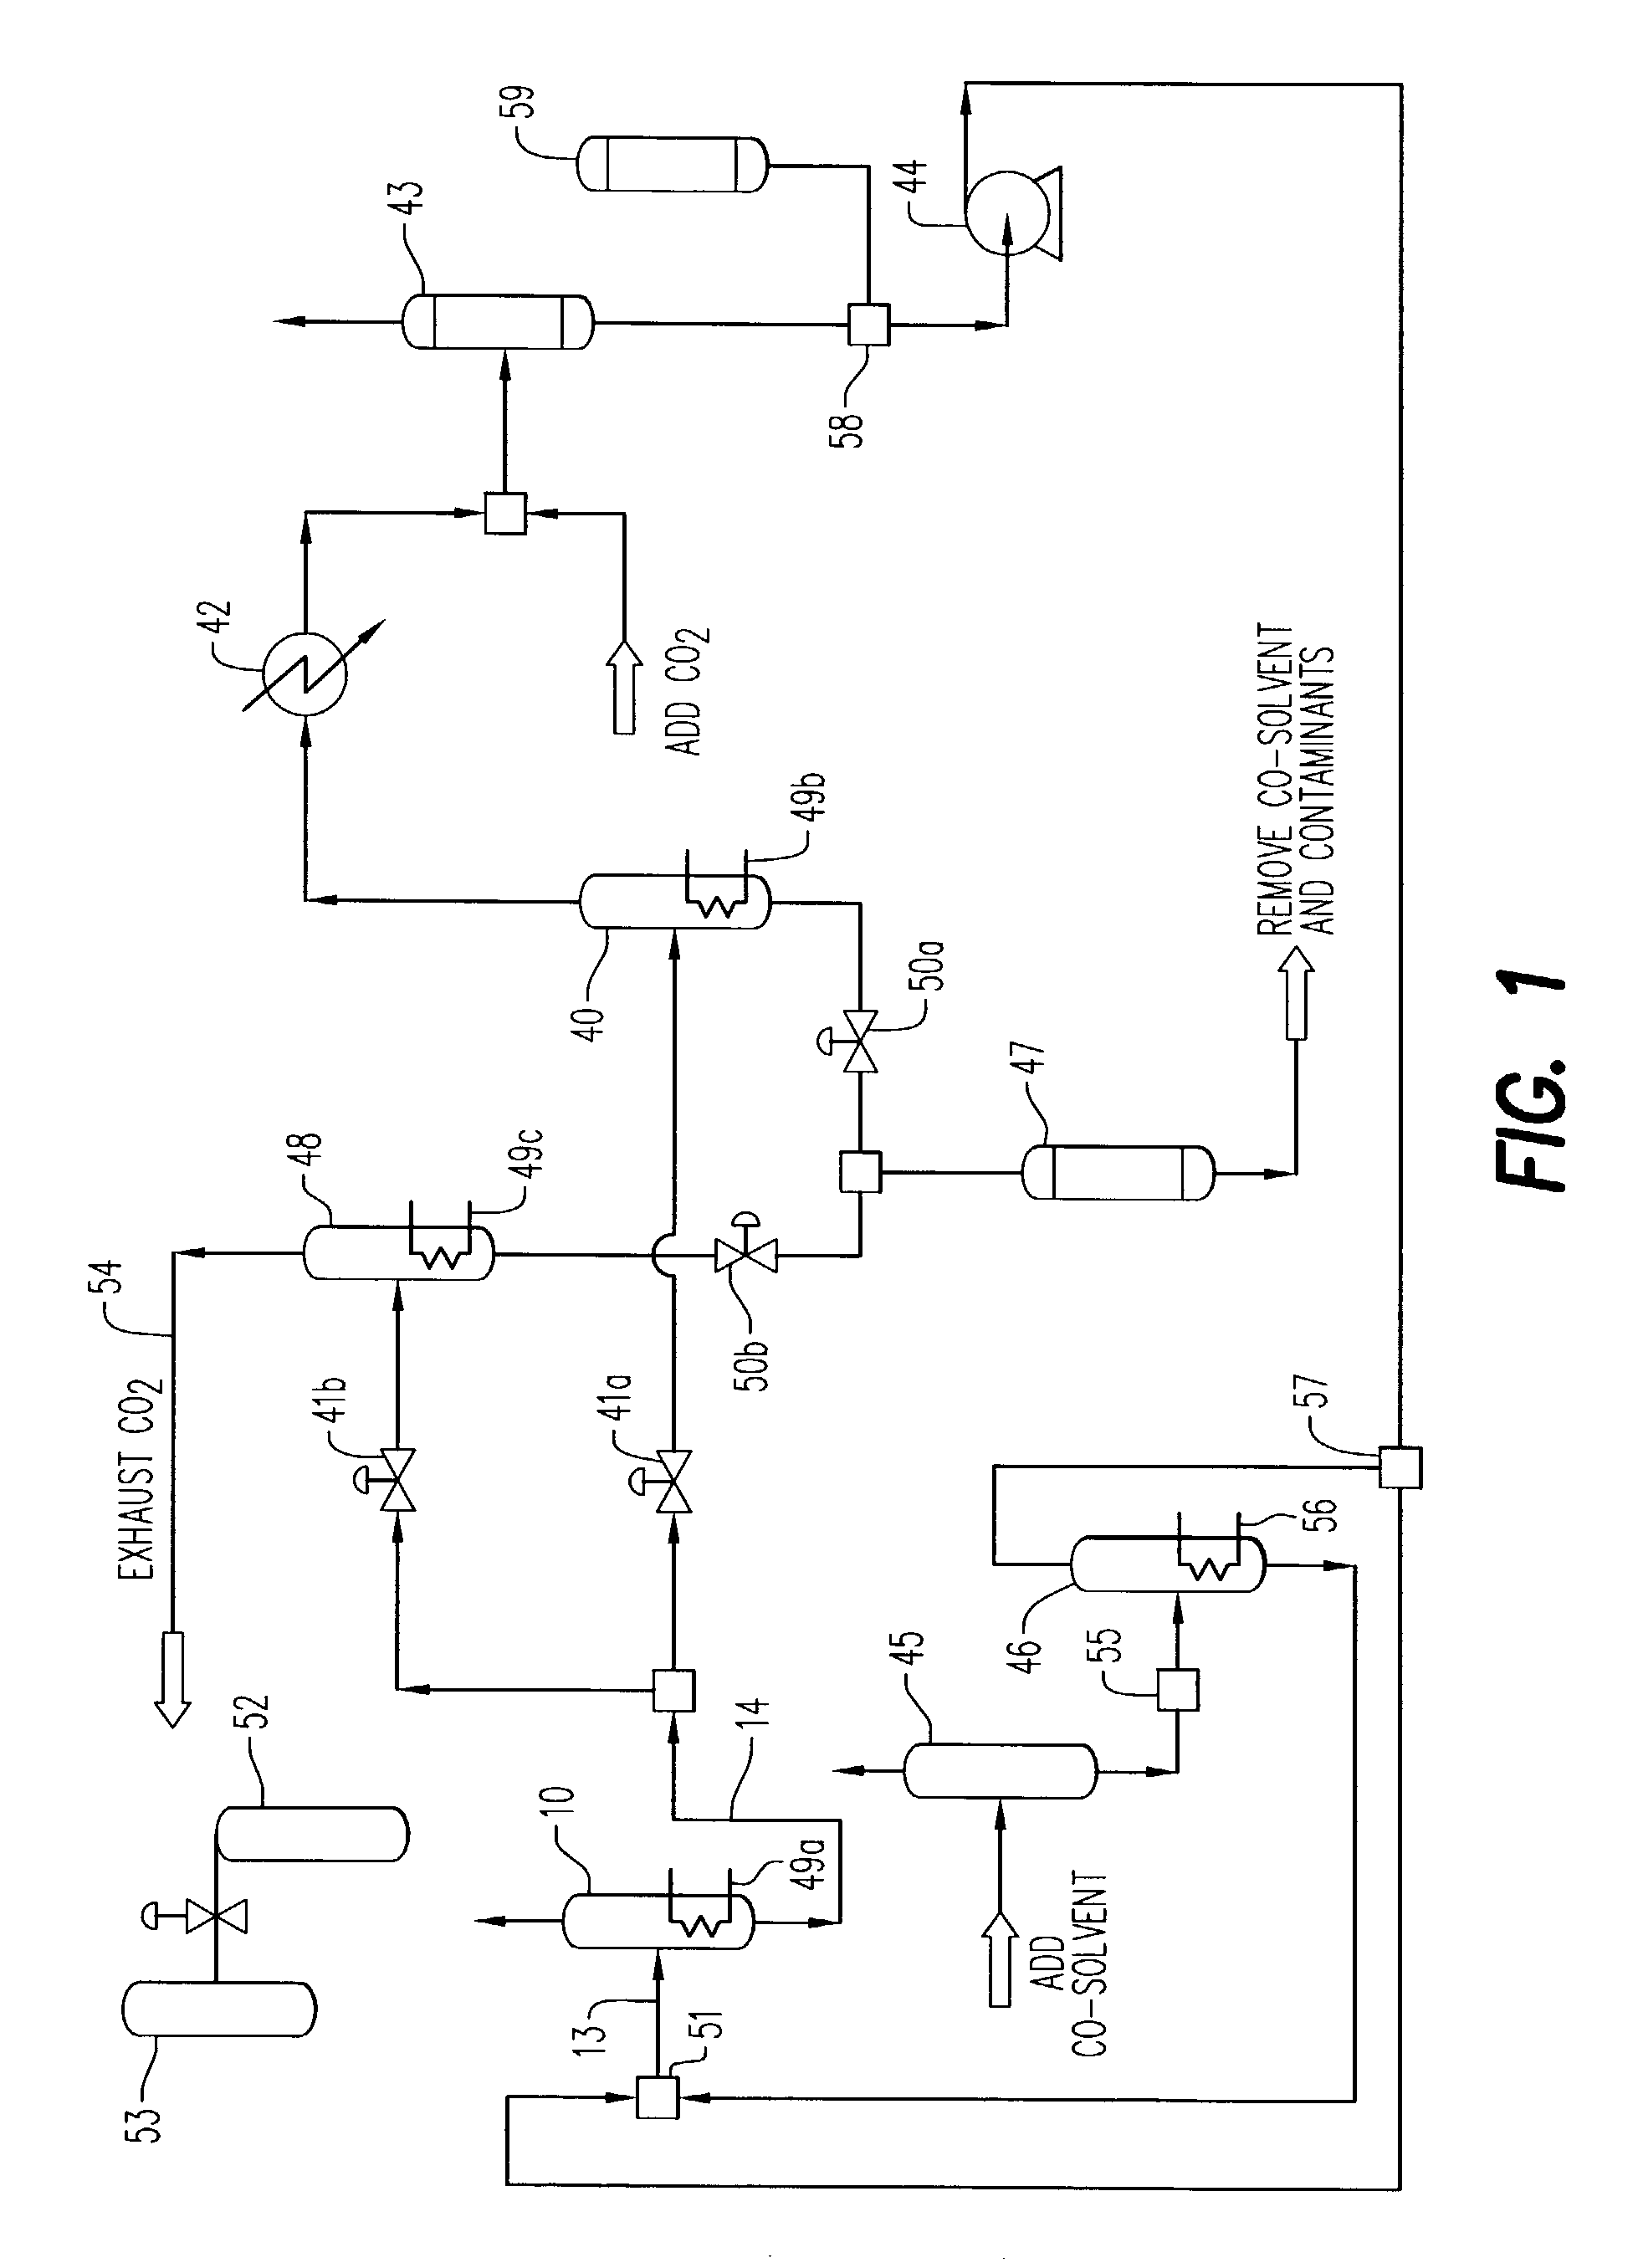 Apparatus and process for supercritical carbon dioxide phase processing